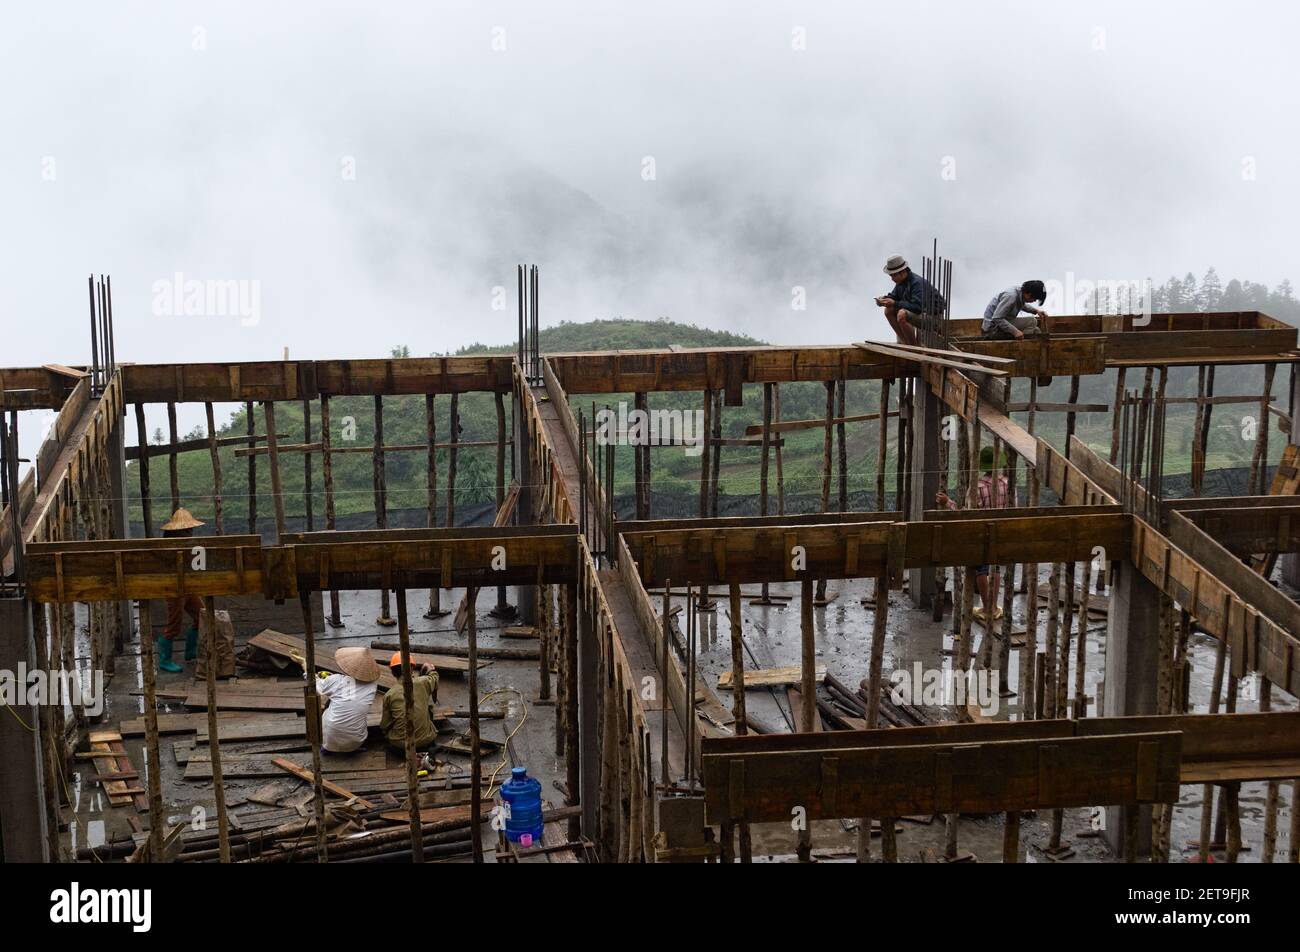 October, 2015 - Sa Pa, Vietnam: Asian people working on construction site on bamboo scaffolding. Stock Photo